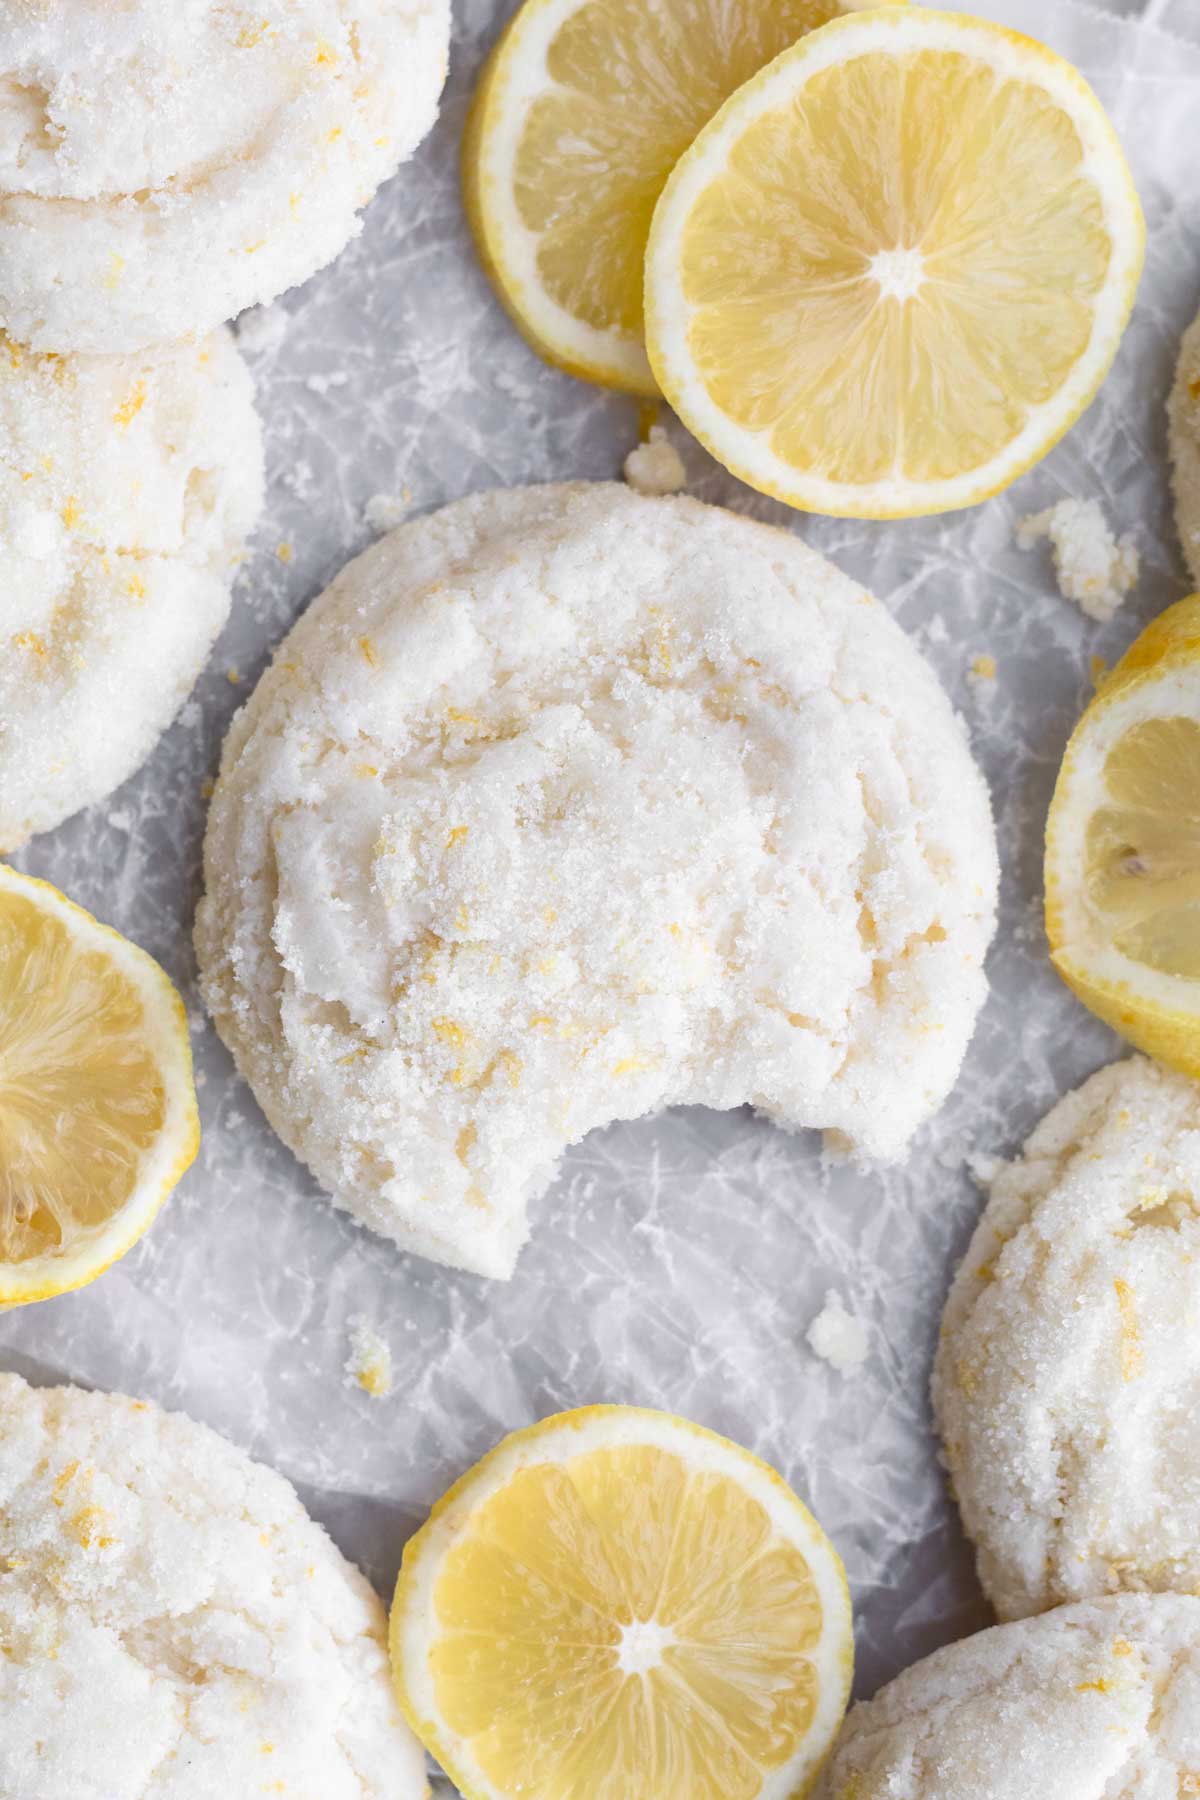 A delicious gluten free Lemon Sugar Cookie with a bite taken out.